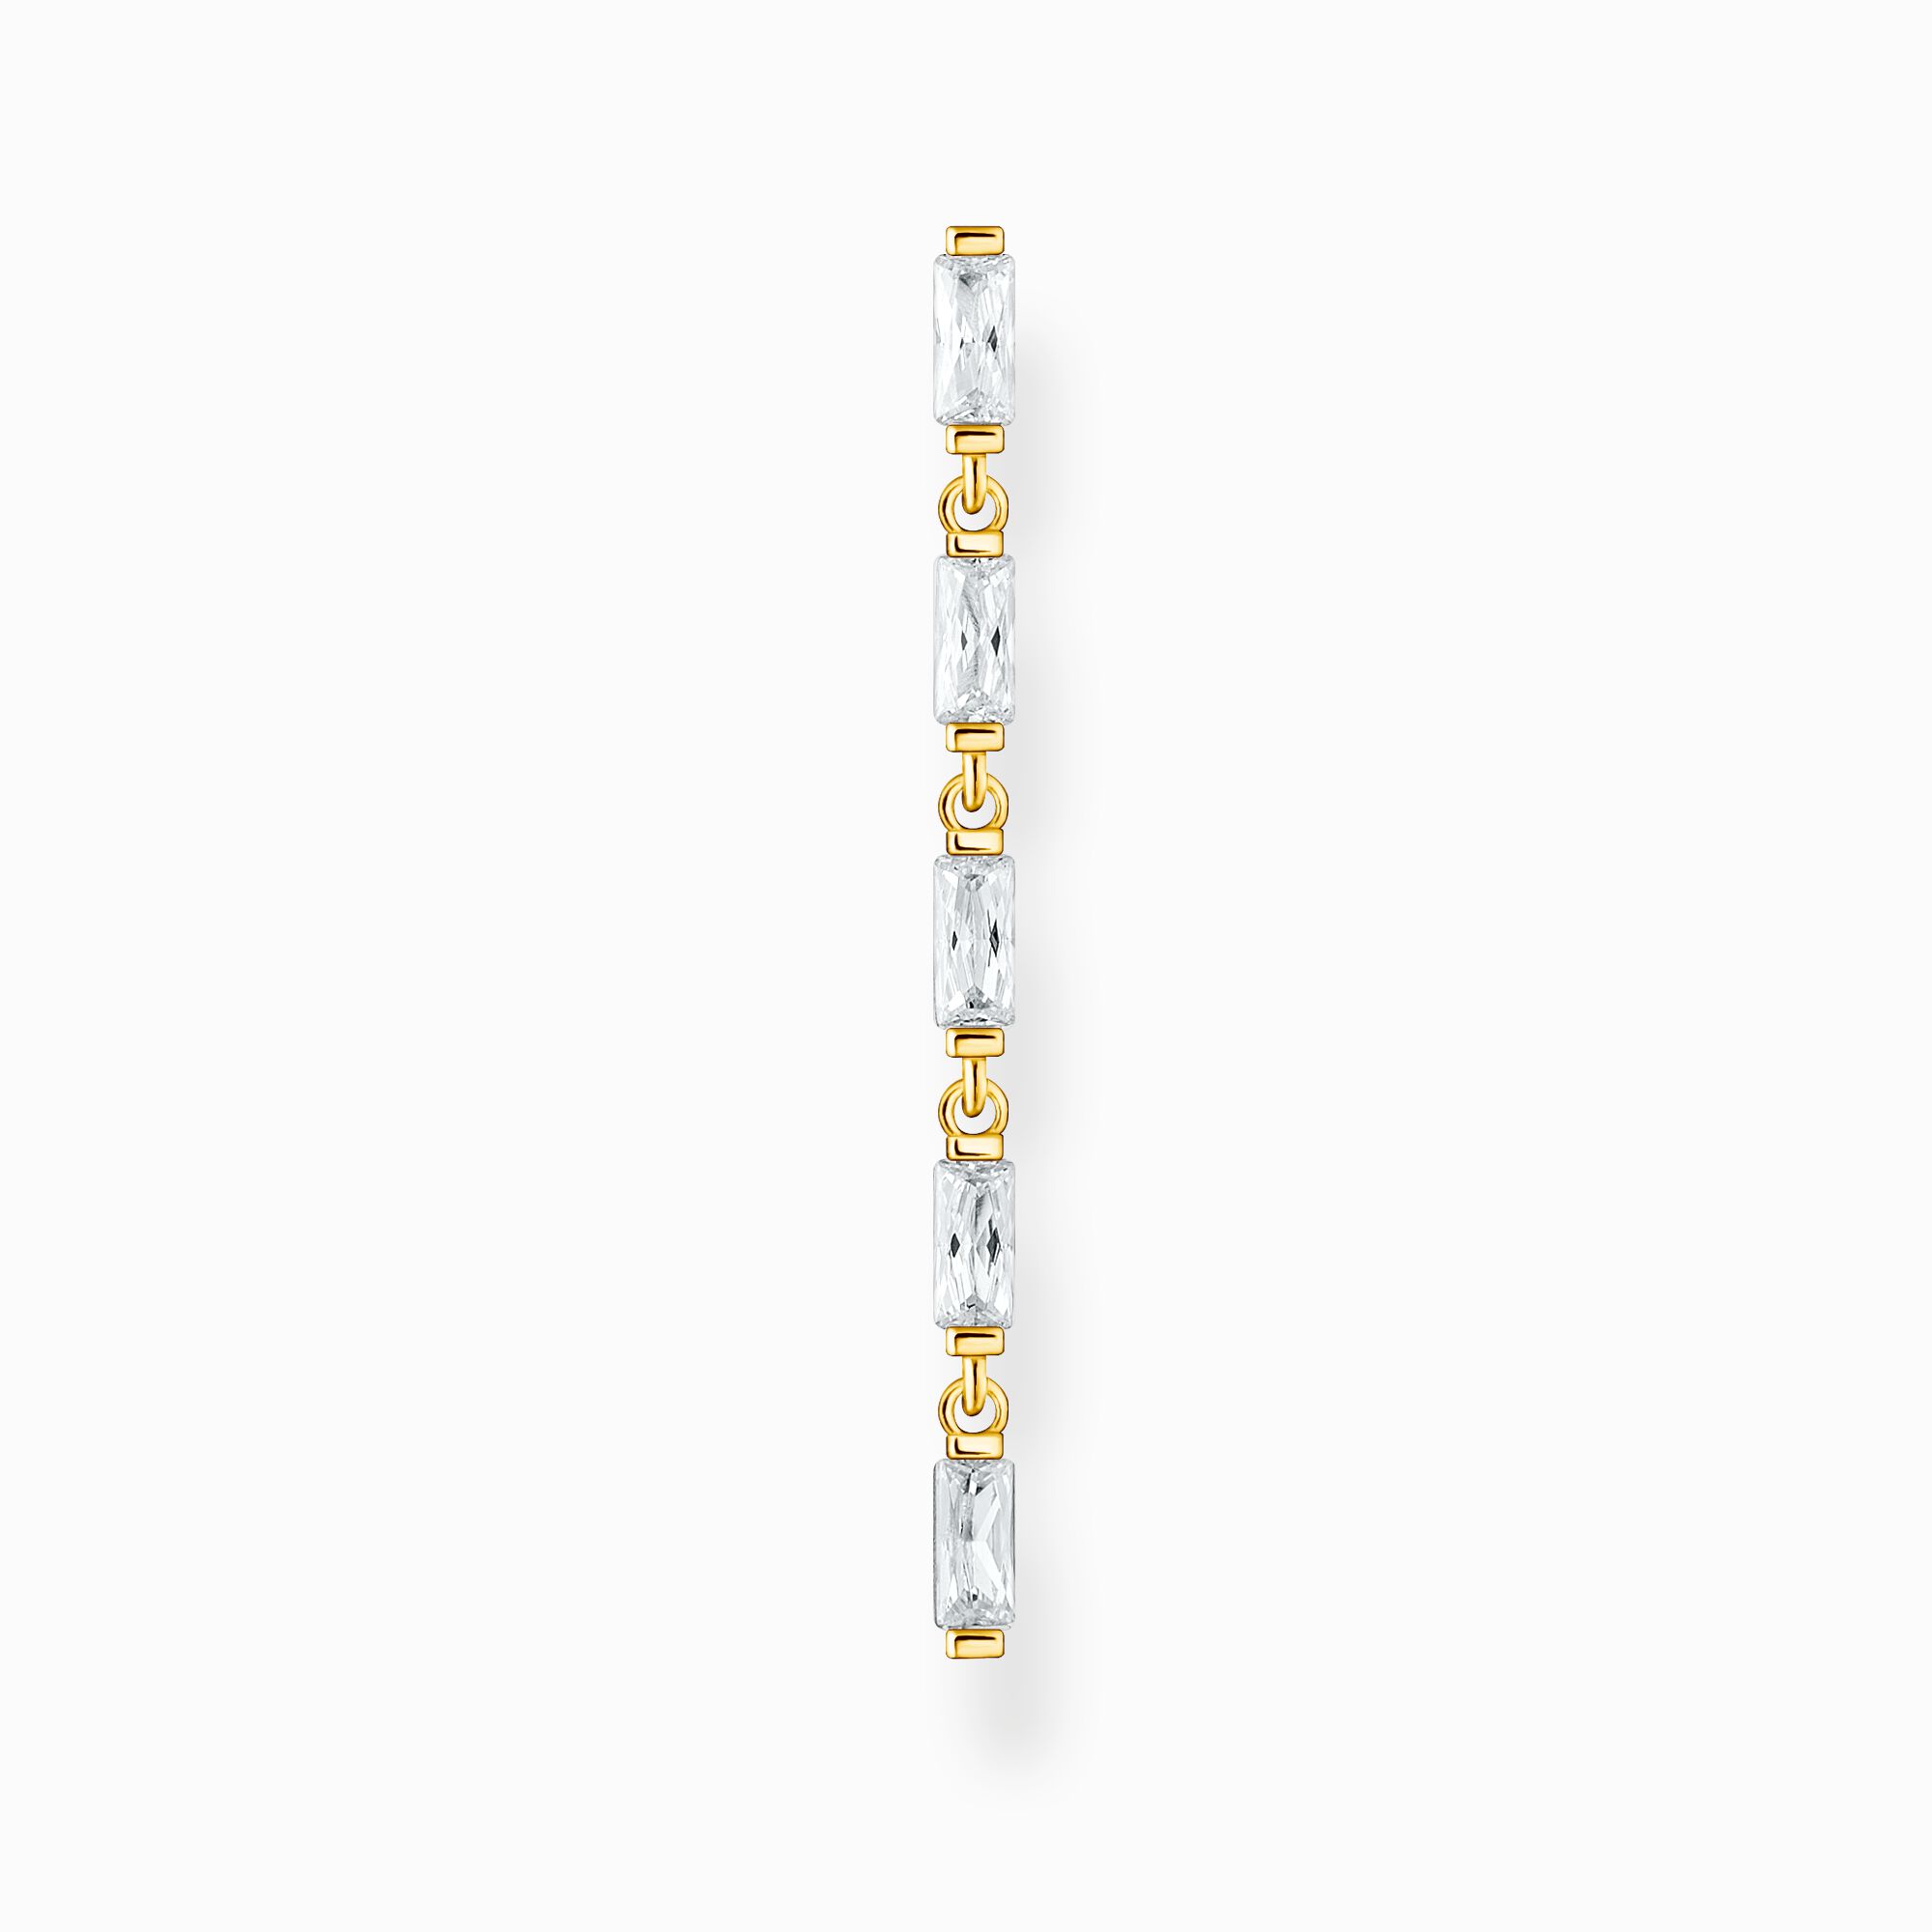 Single earring white stones gold from the Charming Collection collection in the THOMAS SABO online store